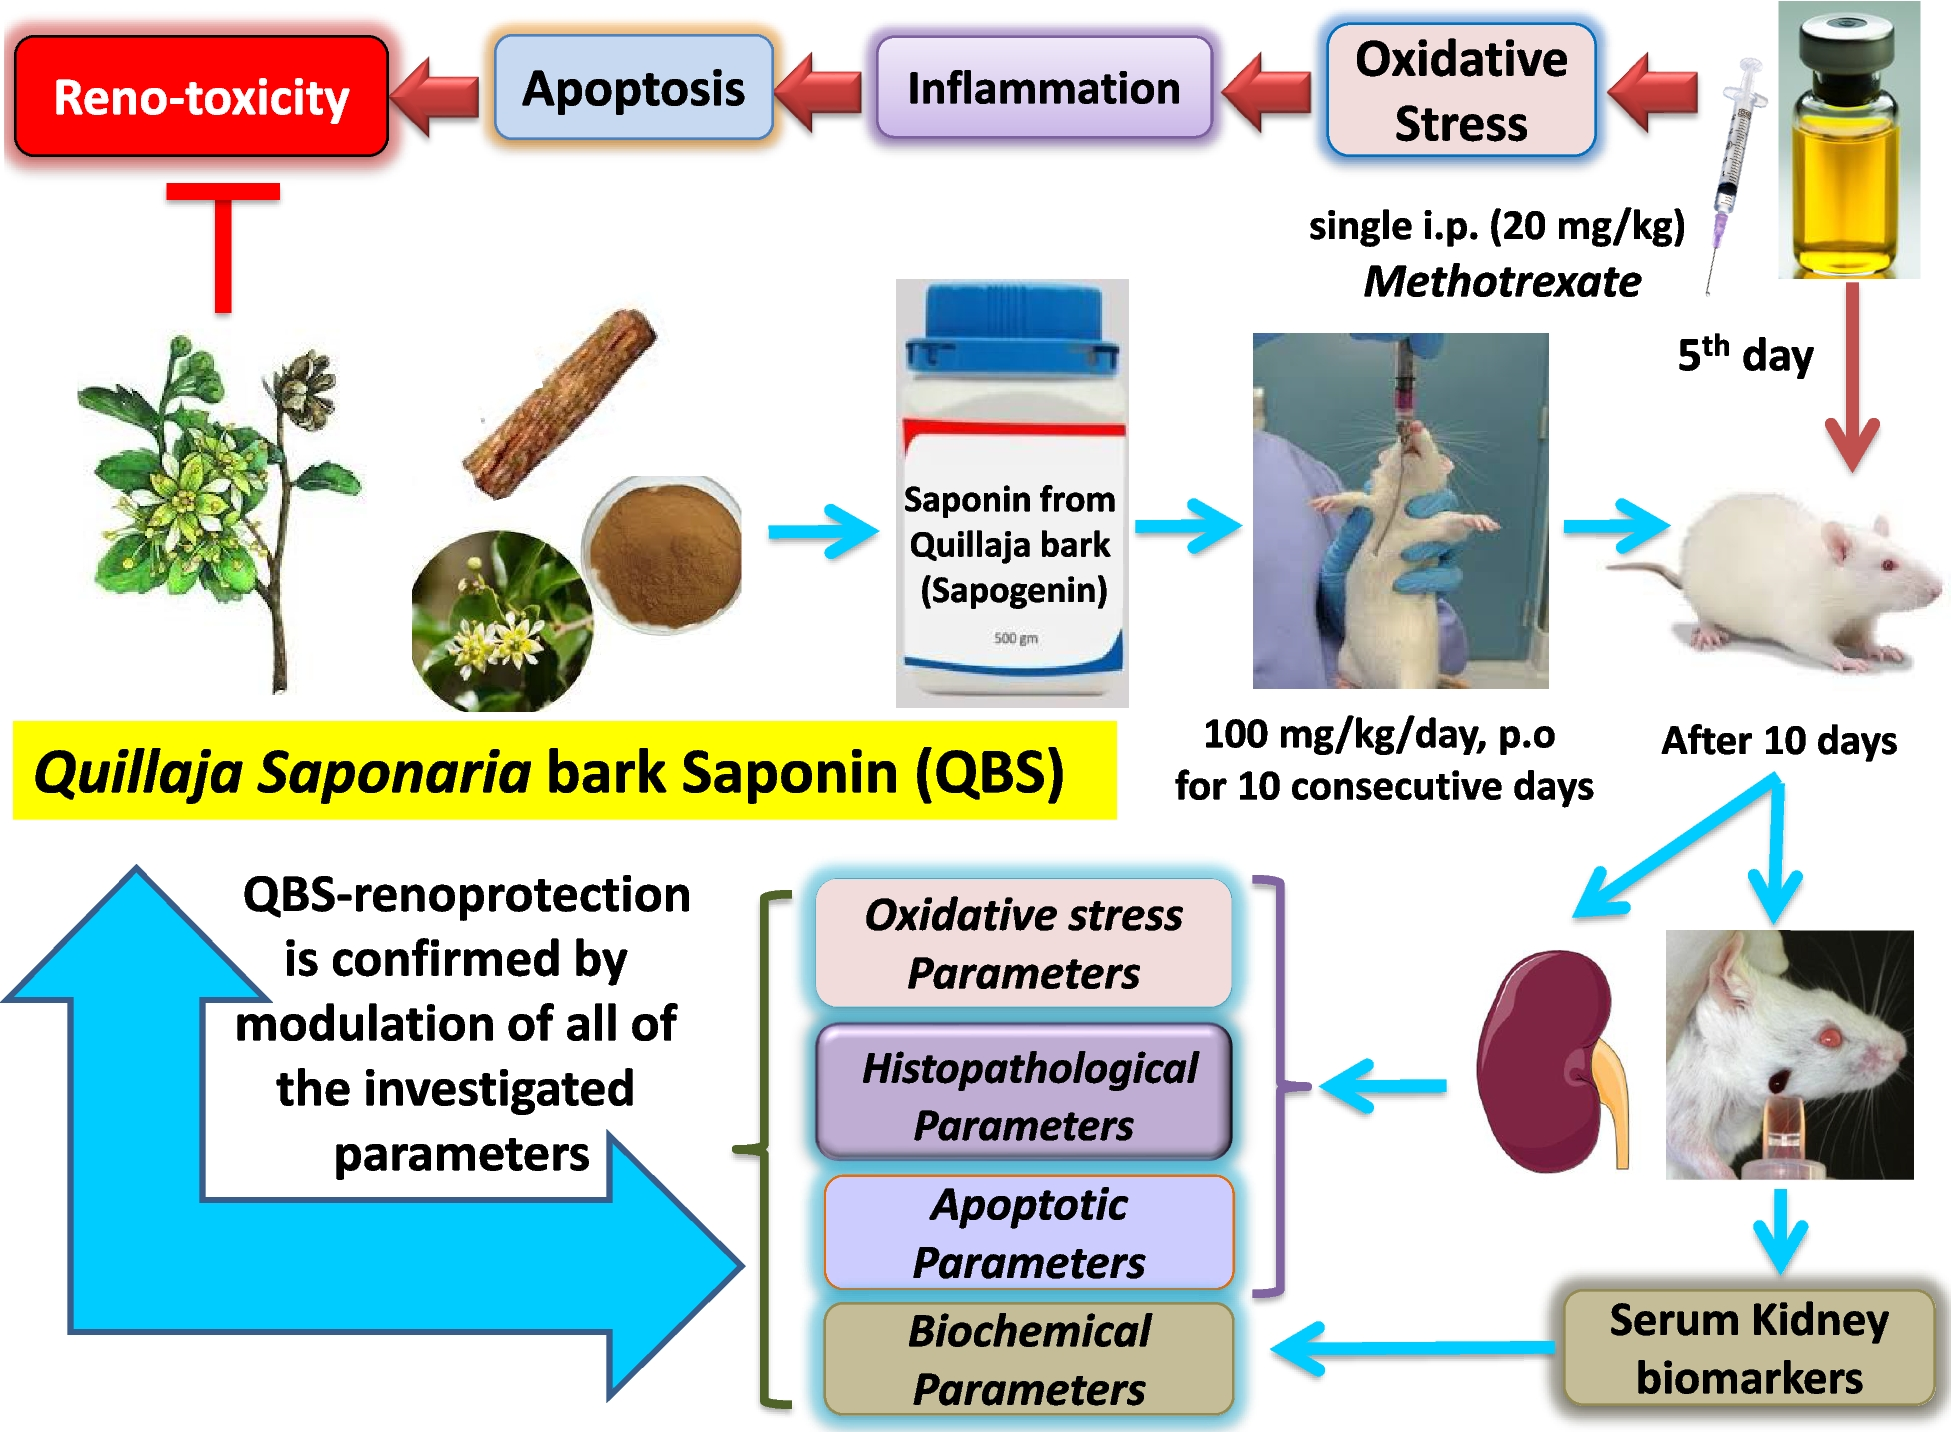 Quillaja saponin mitigates methotrexate-provoked renal injury; insight into Nrf-2/Keap-1 pathway modulation with suppression of oxidative stress and inflammation